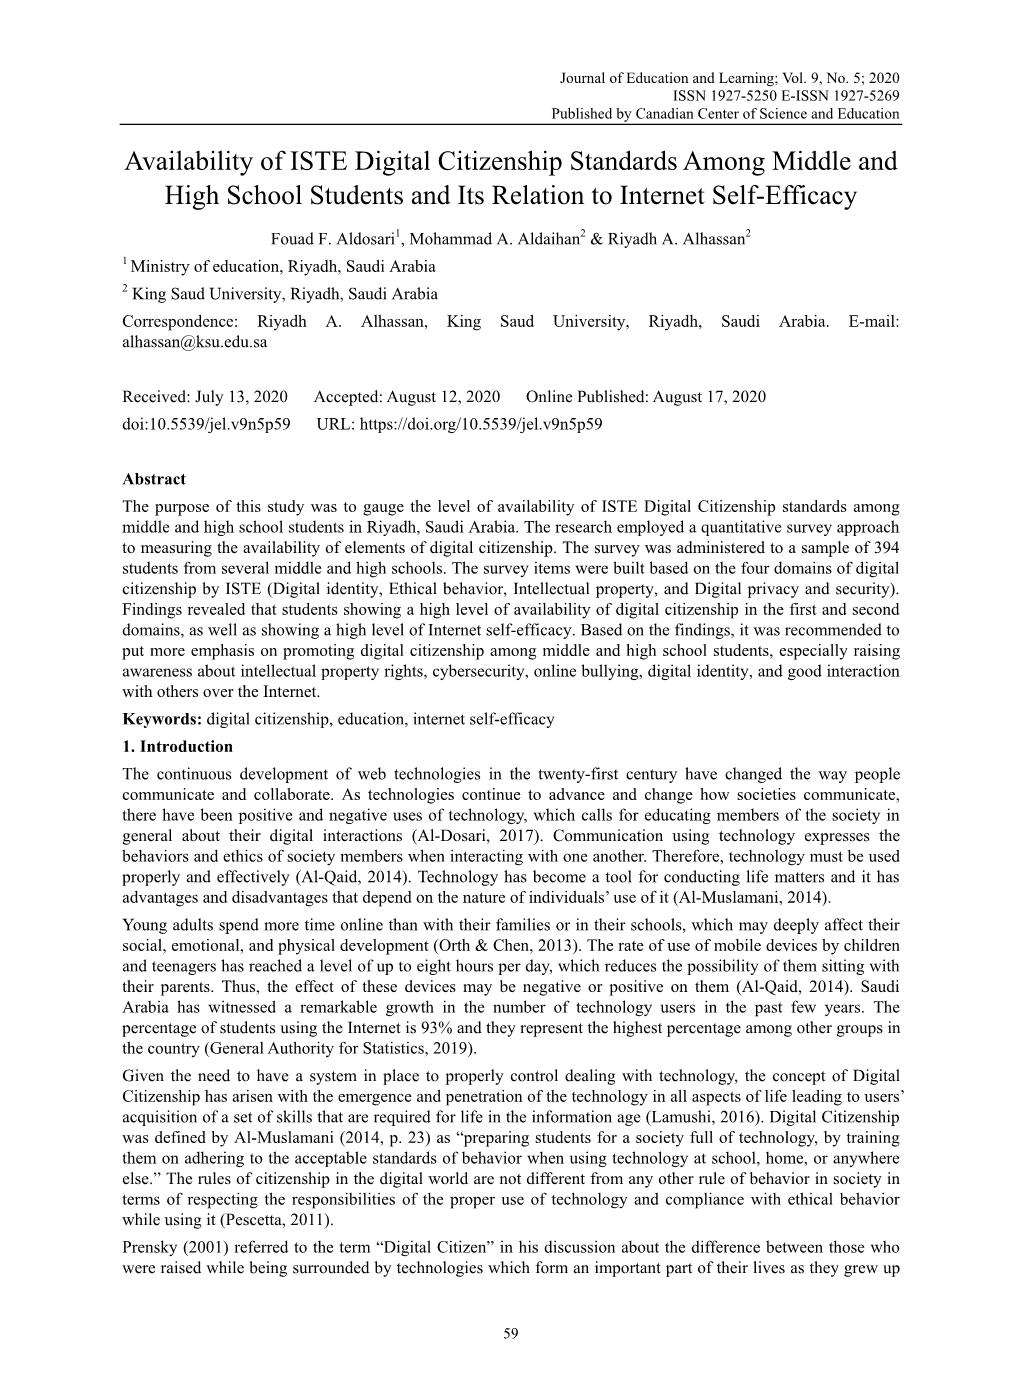 Availability of ISTE Digital Citizenship Standards Among Middle and High School Students and Its Relation to Internet Self-Efficacy